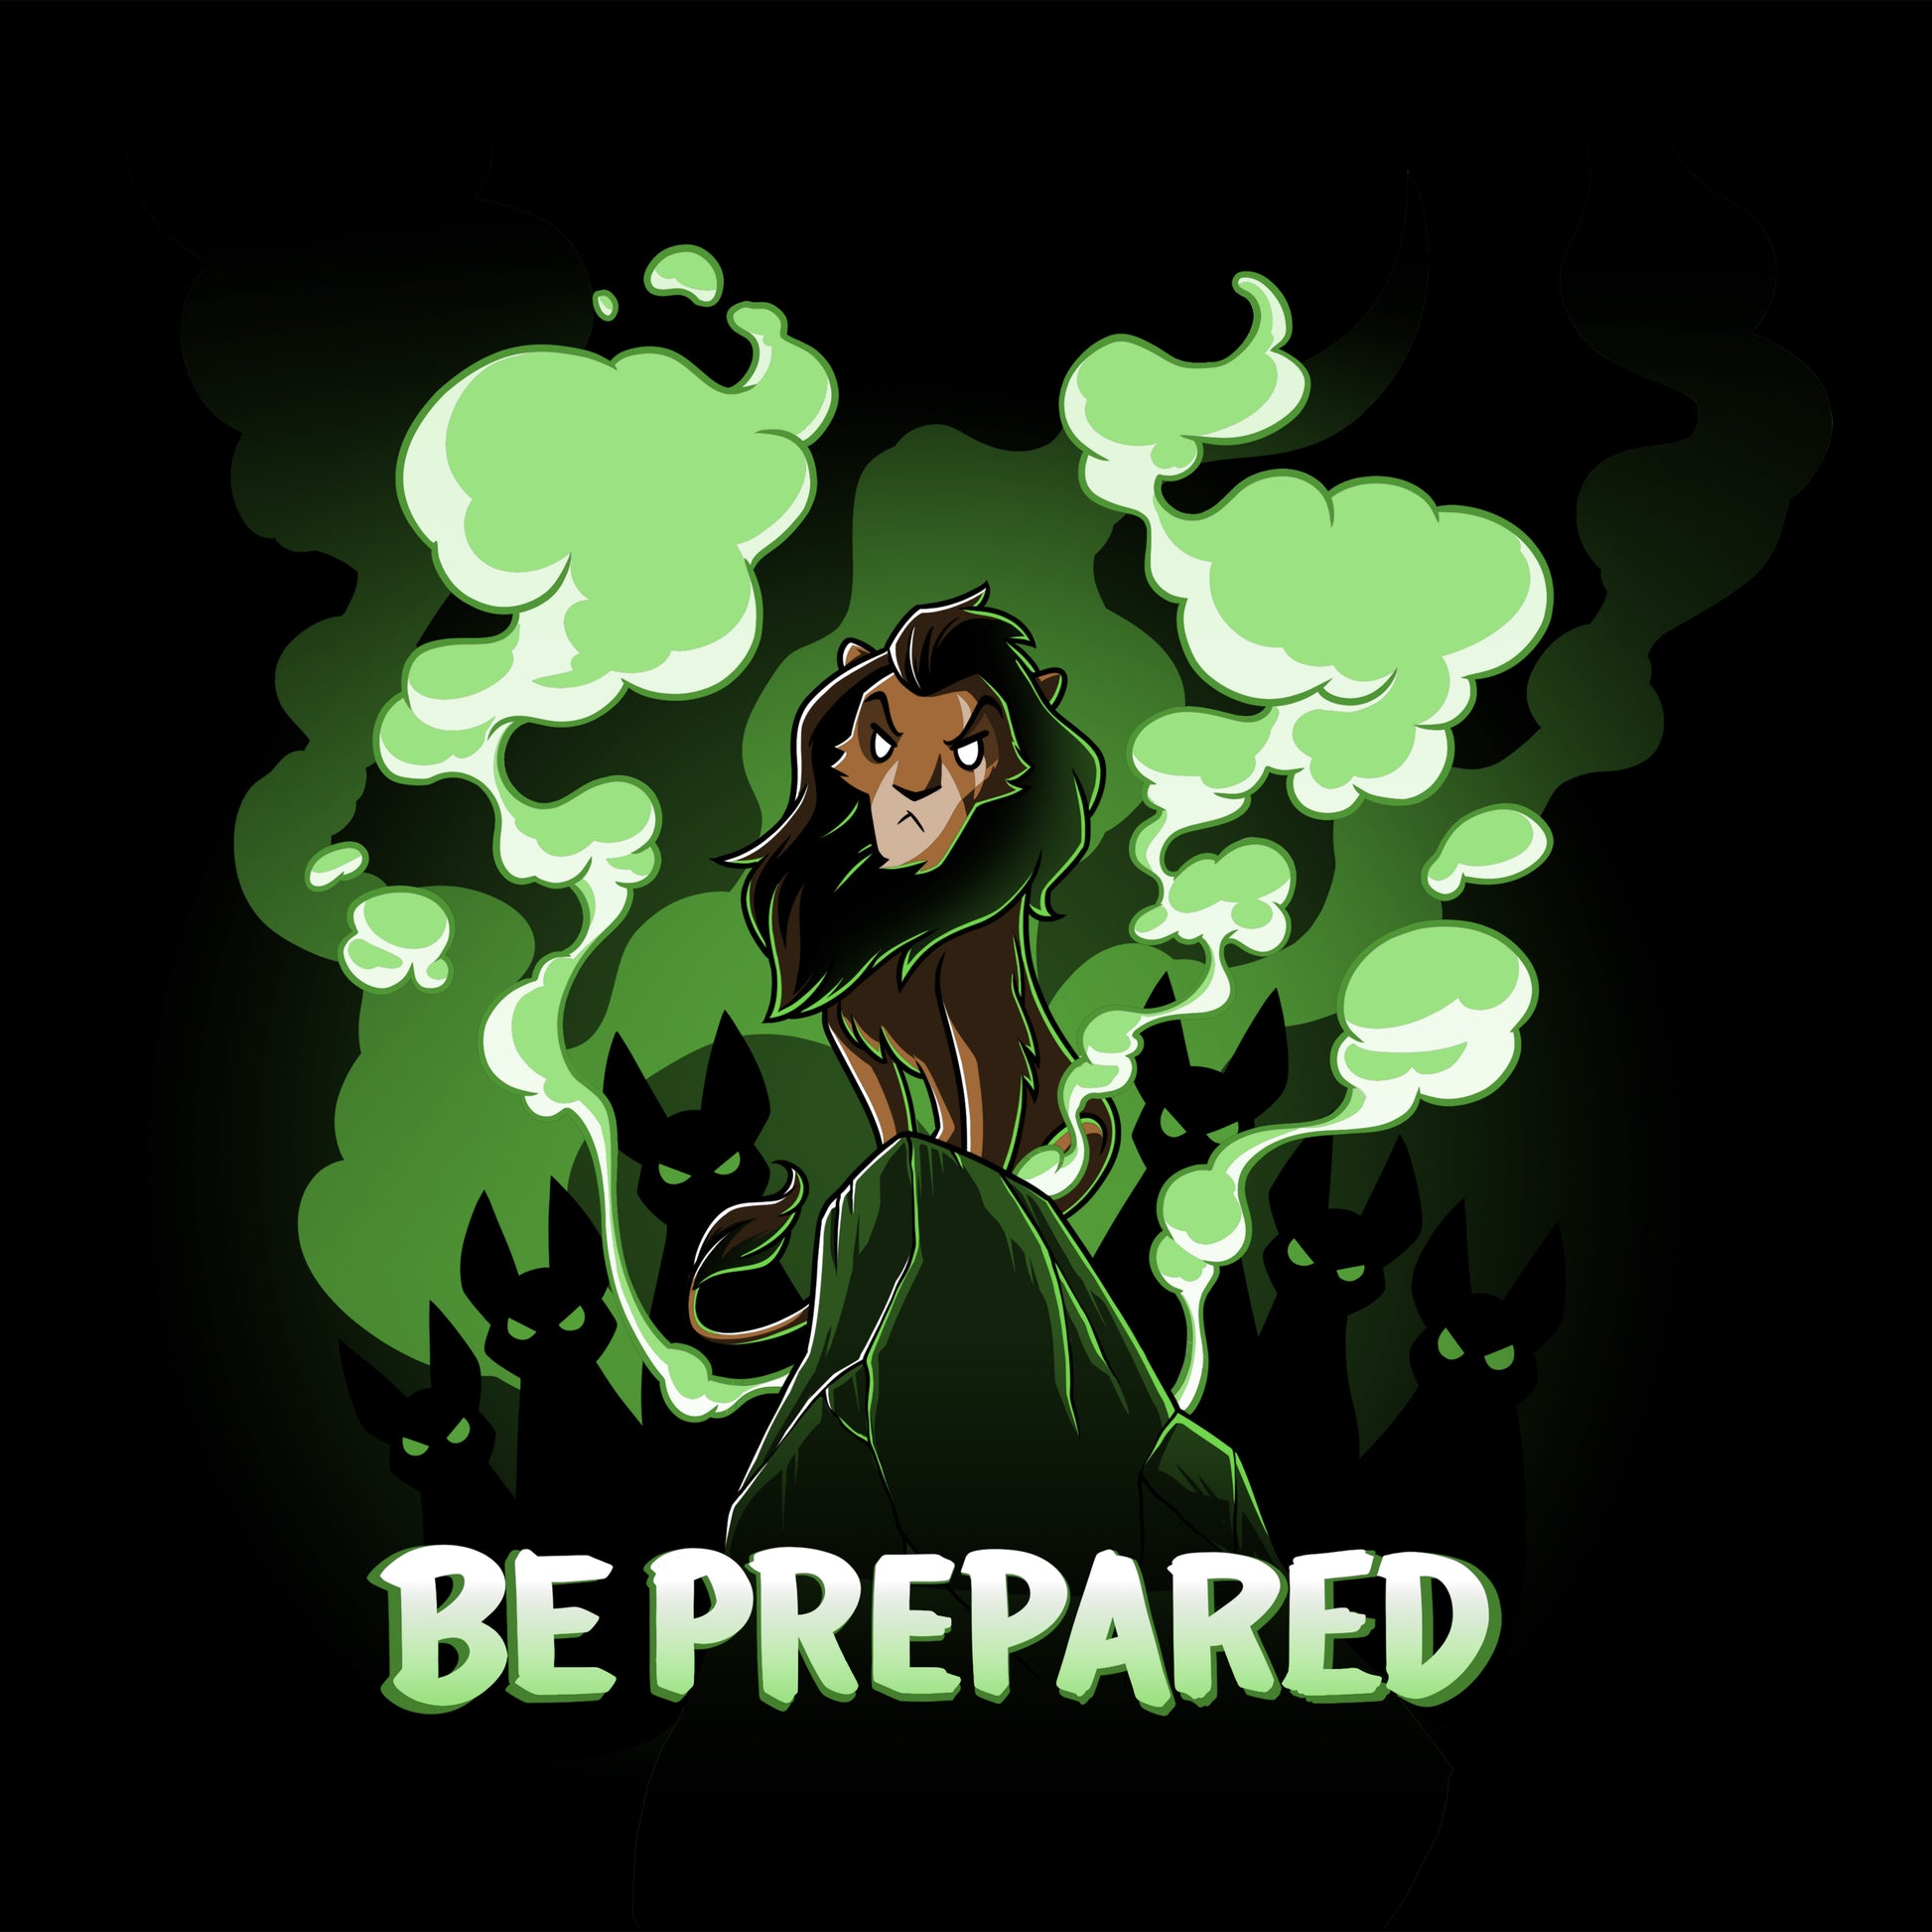 An image of a girl with a green background wearing a Disney Lion King T-shirt named "Be Prepared".